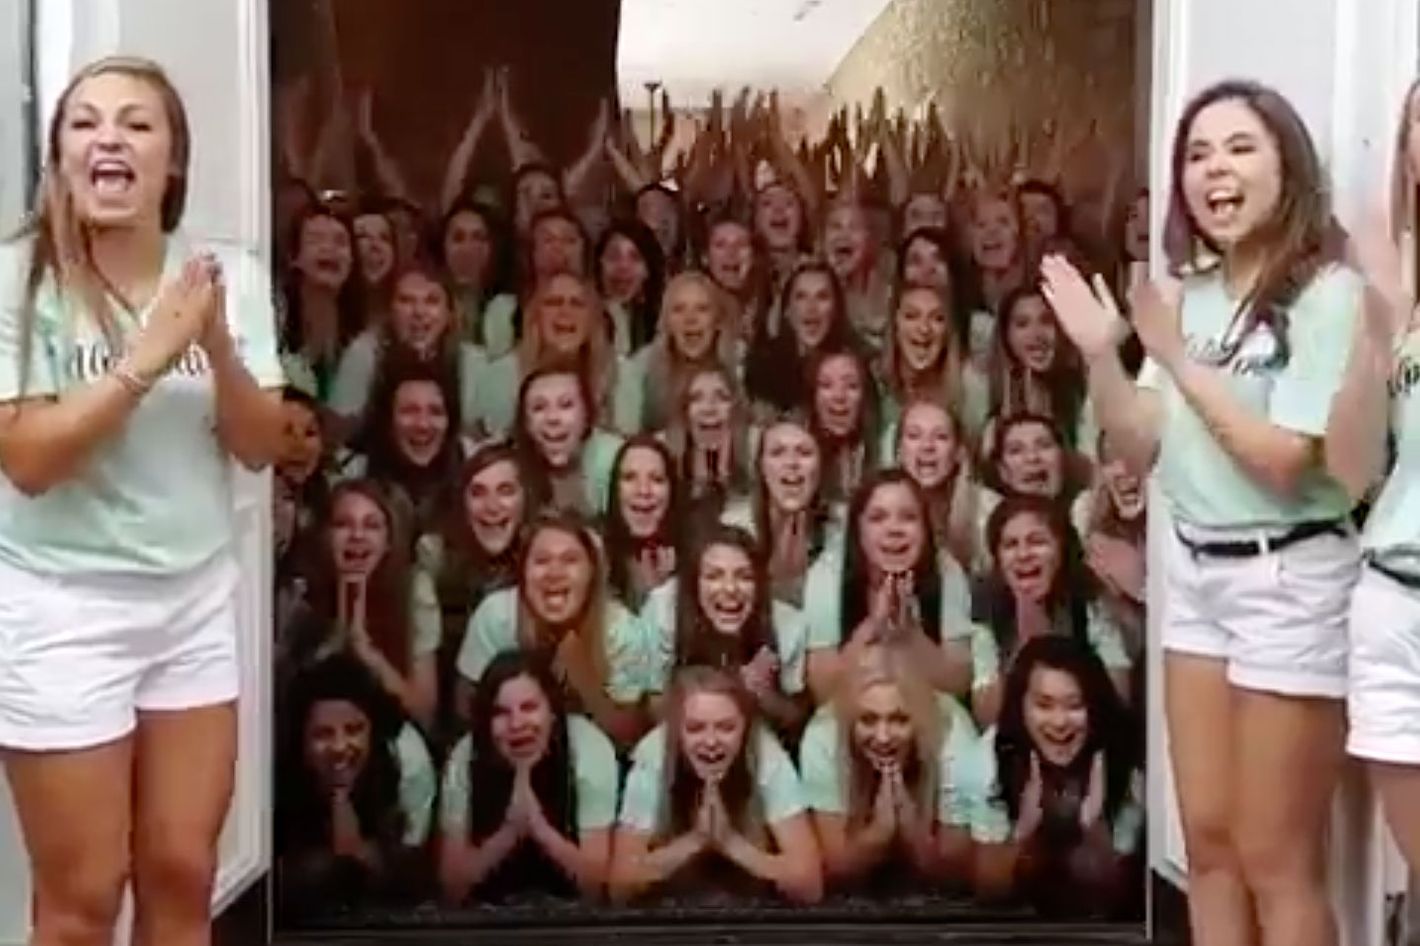 This Sorority Video Will Haunt You for Years to Come